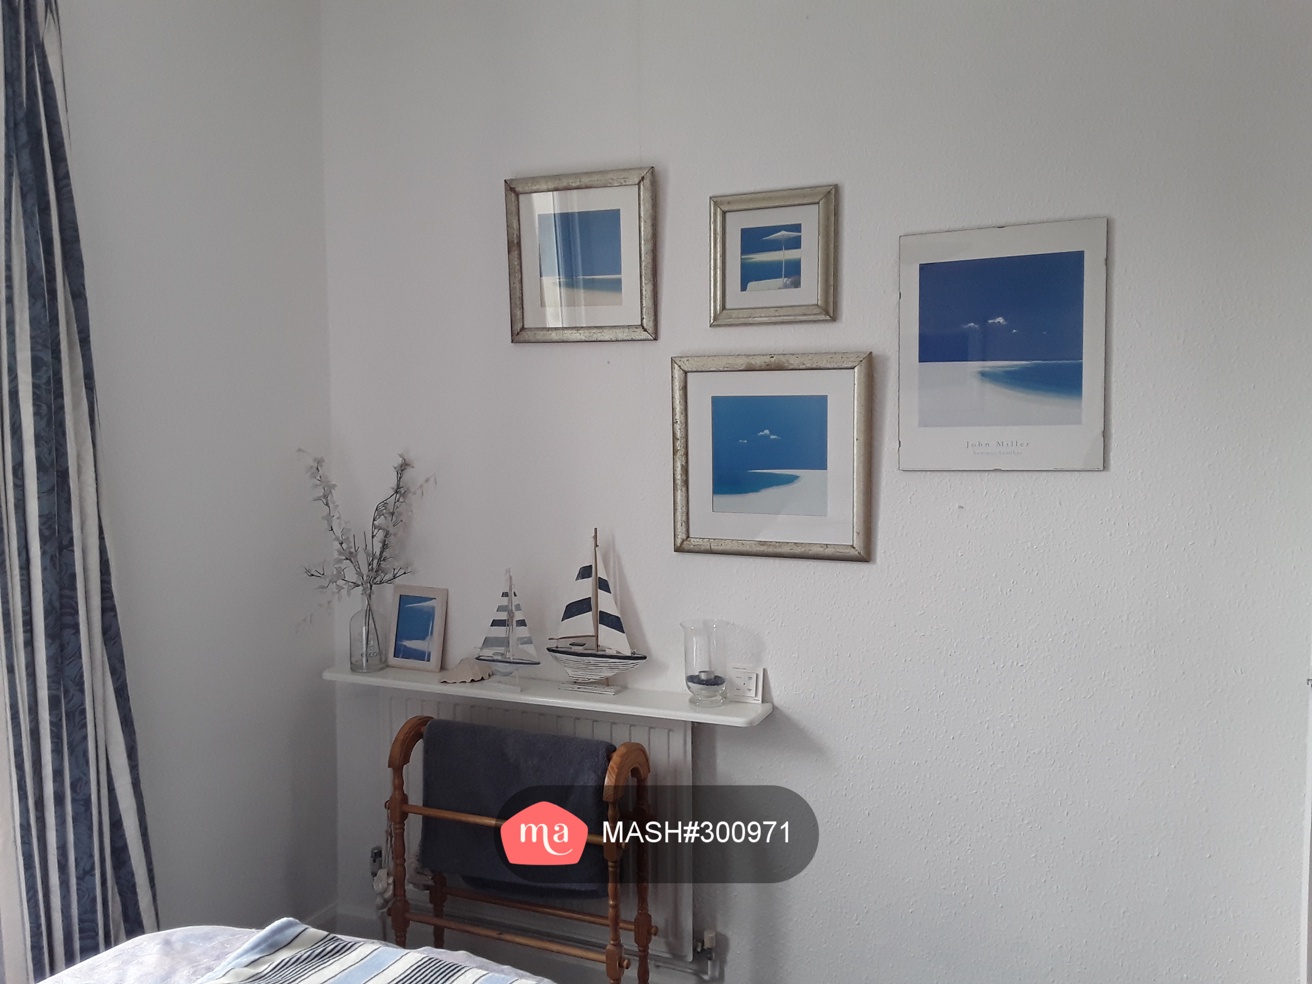 2 Bedroom Flat to rent in Plymouth - Mashroom